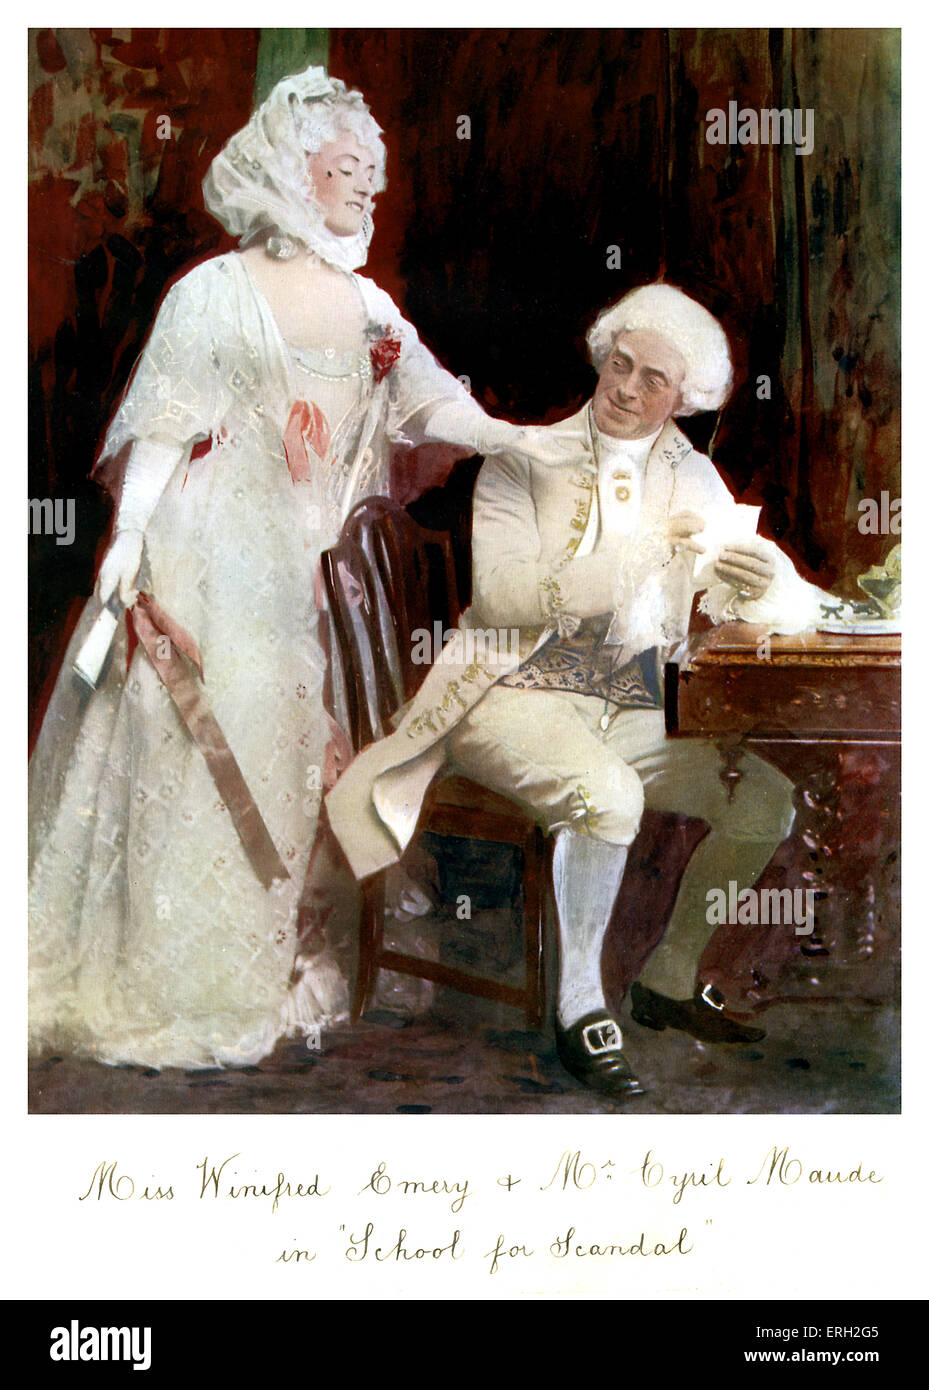 Winifred Emery as Lady Teazle and Cyril Maude as Sir Peter Teazle in 'School for Scandal', a comedy of manners written by Stock Photo